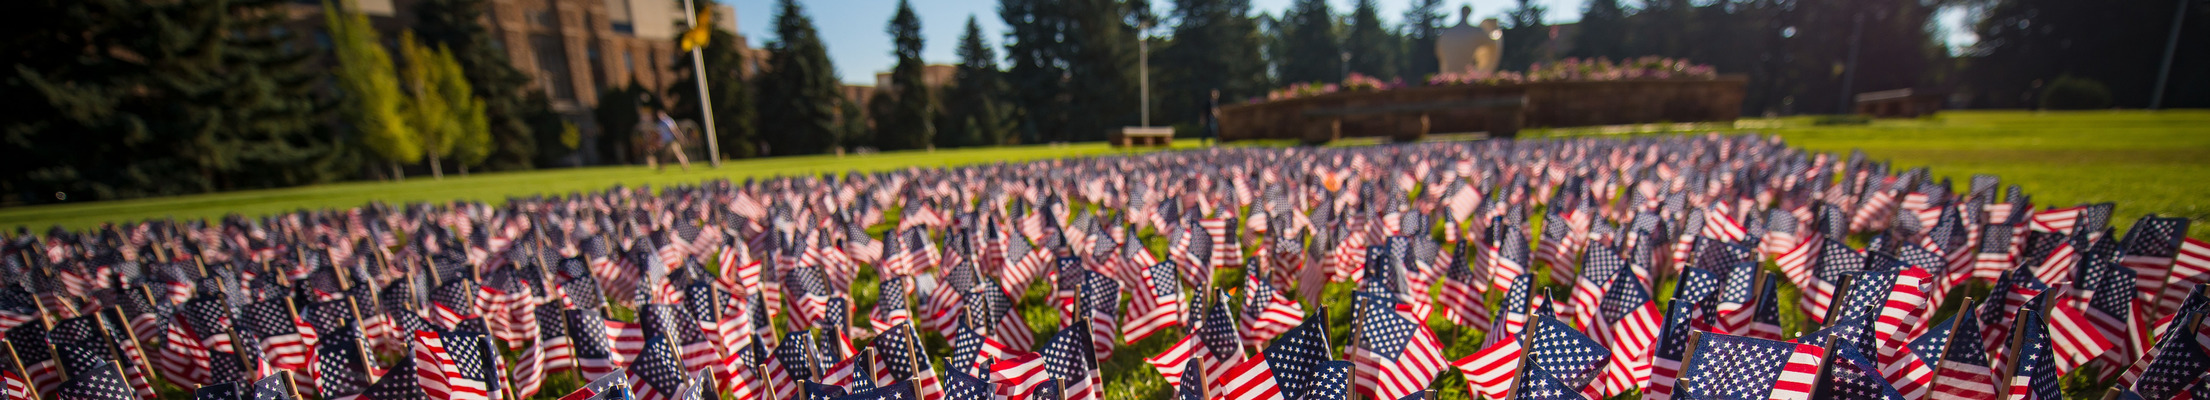 American flags covering prexy's pasture